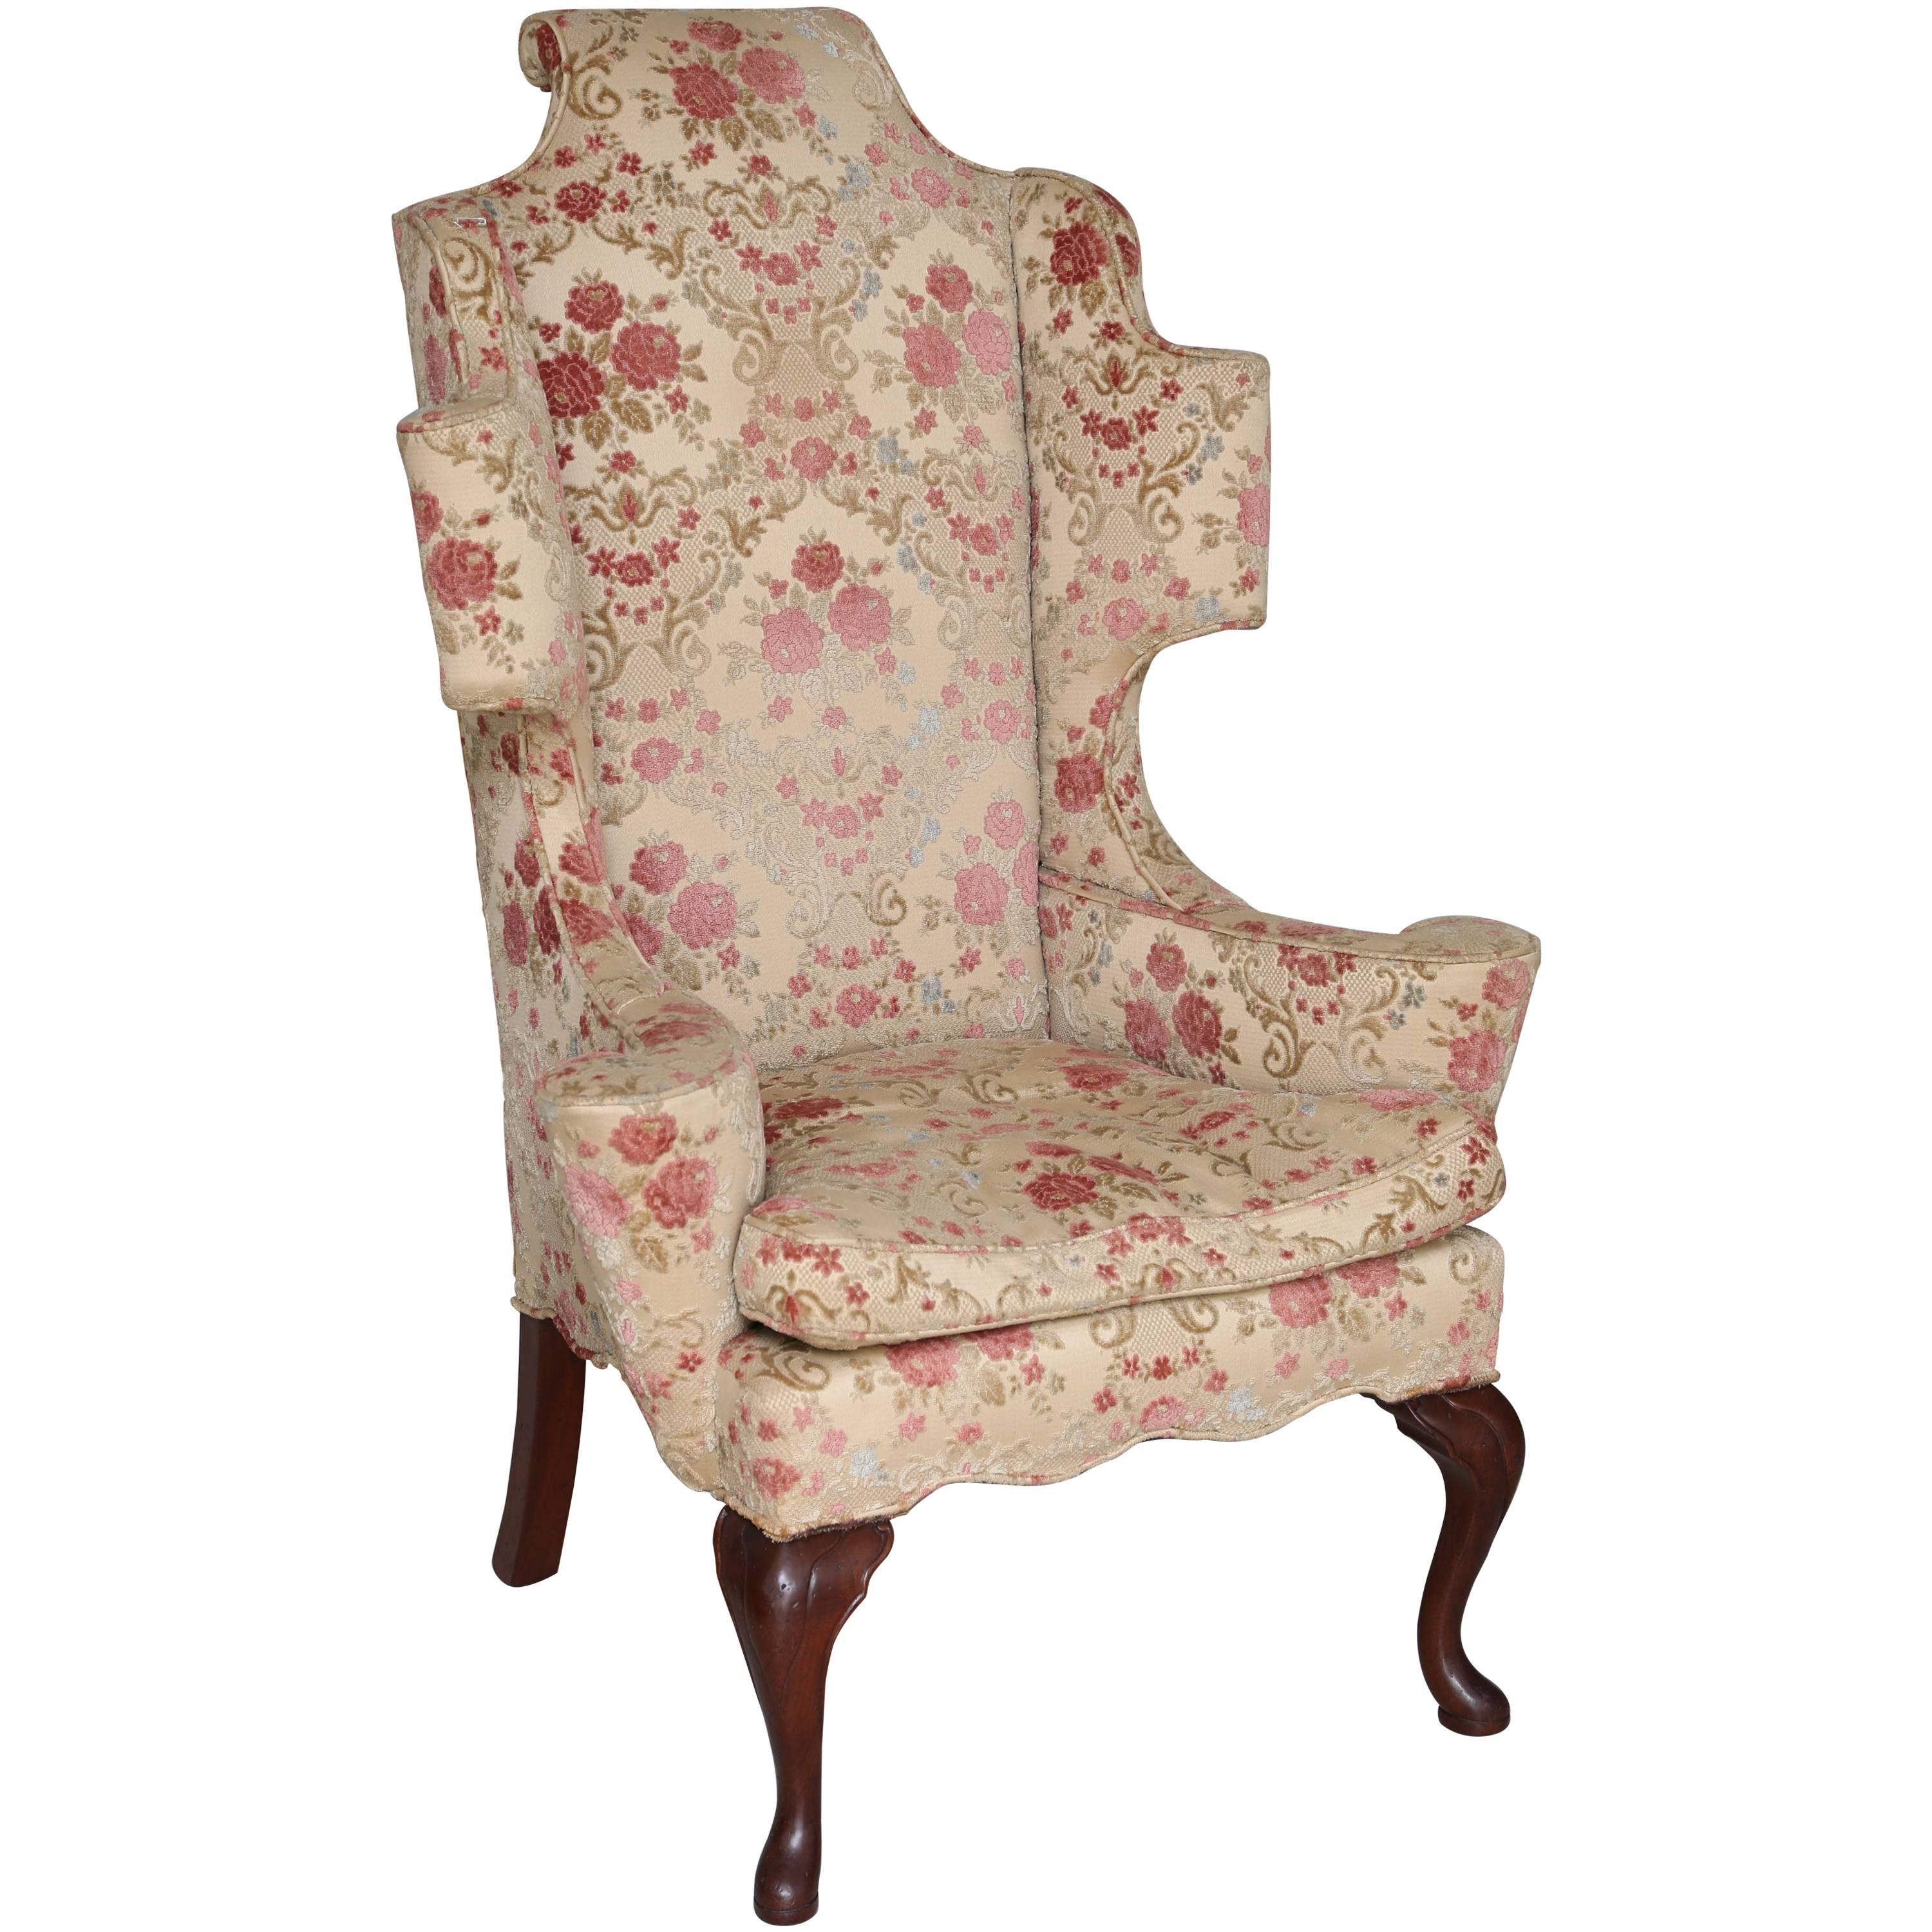 Dynamic Queen Anne Style Chair with Floral Upholstery For Sale